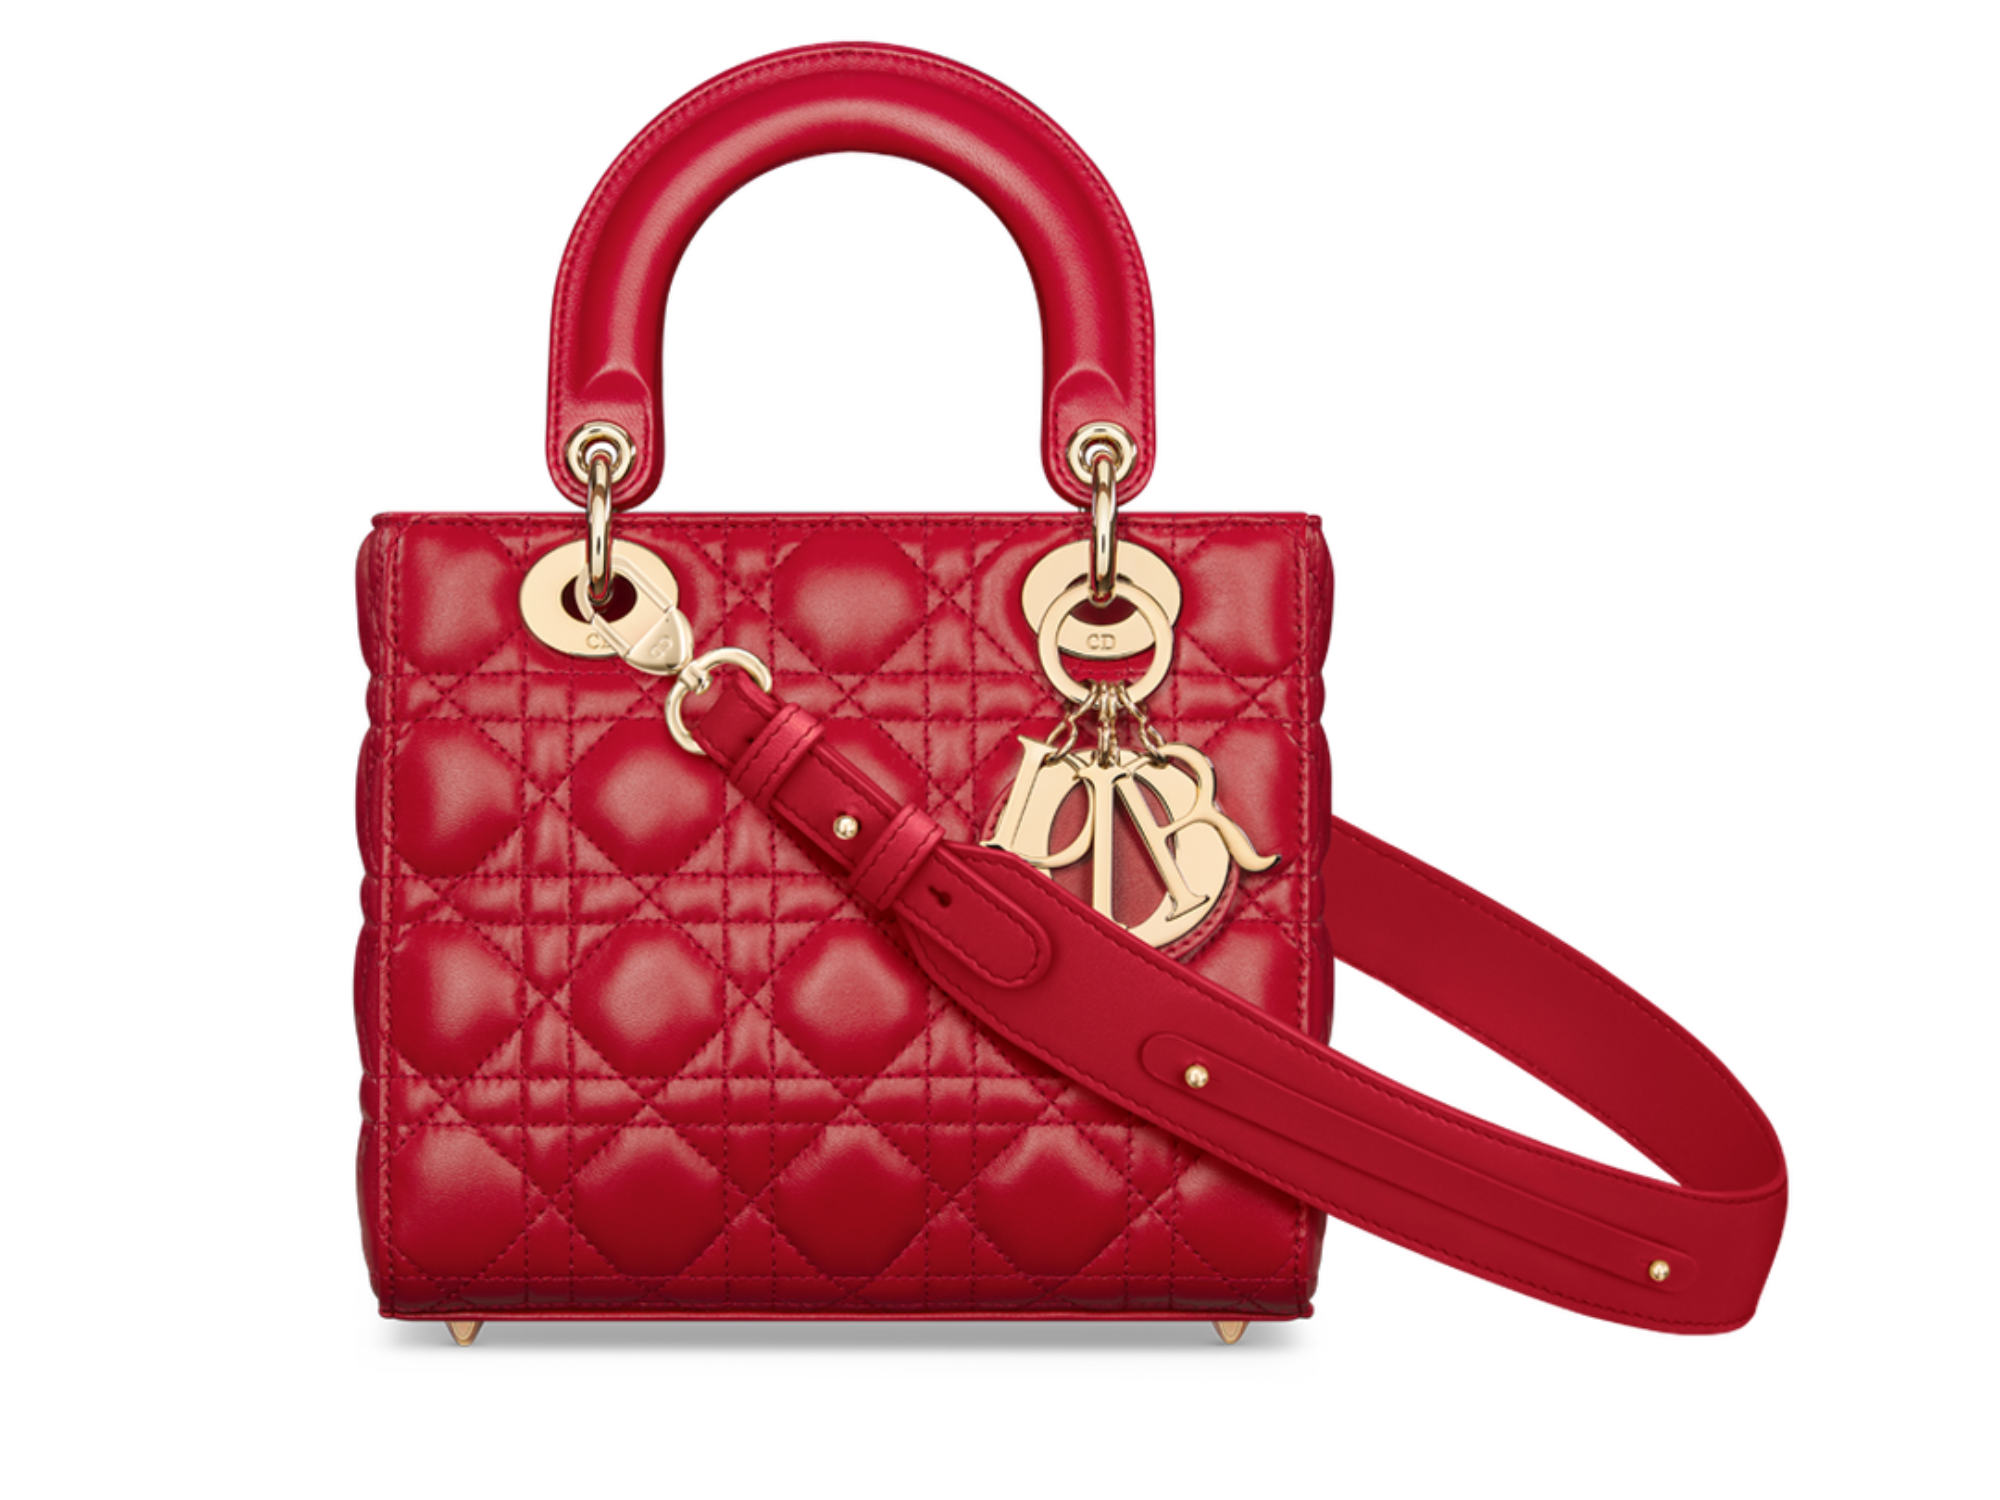 Lady-Dior-Red-Bag